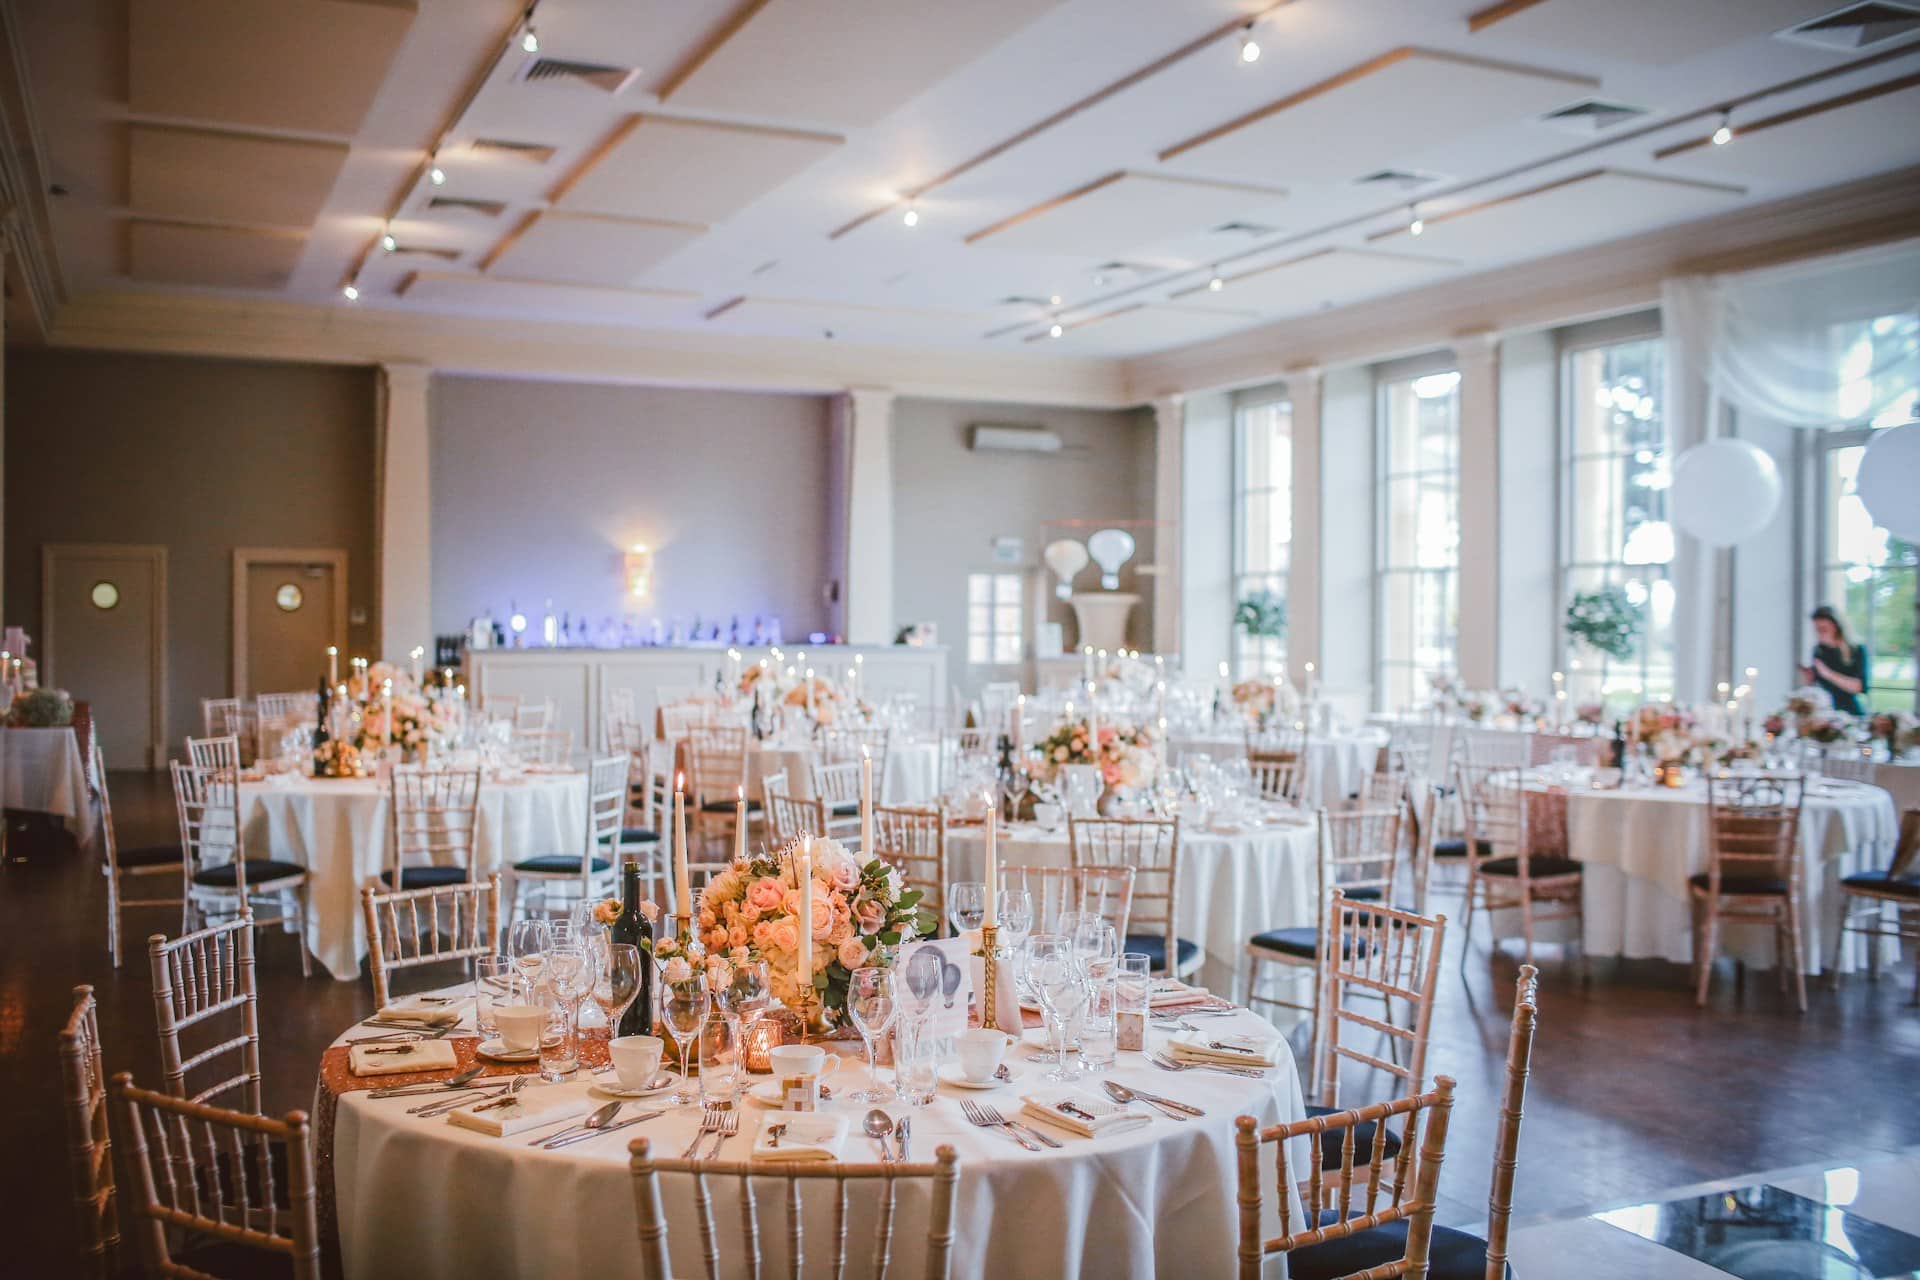 Image title: Table decoration in a room. Image alt-title: pop-up events Image URL: https://unsplash.com/photos/table-settings-in-room-OAVqa8hQvWI 